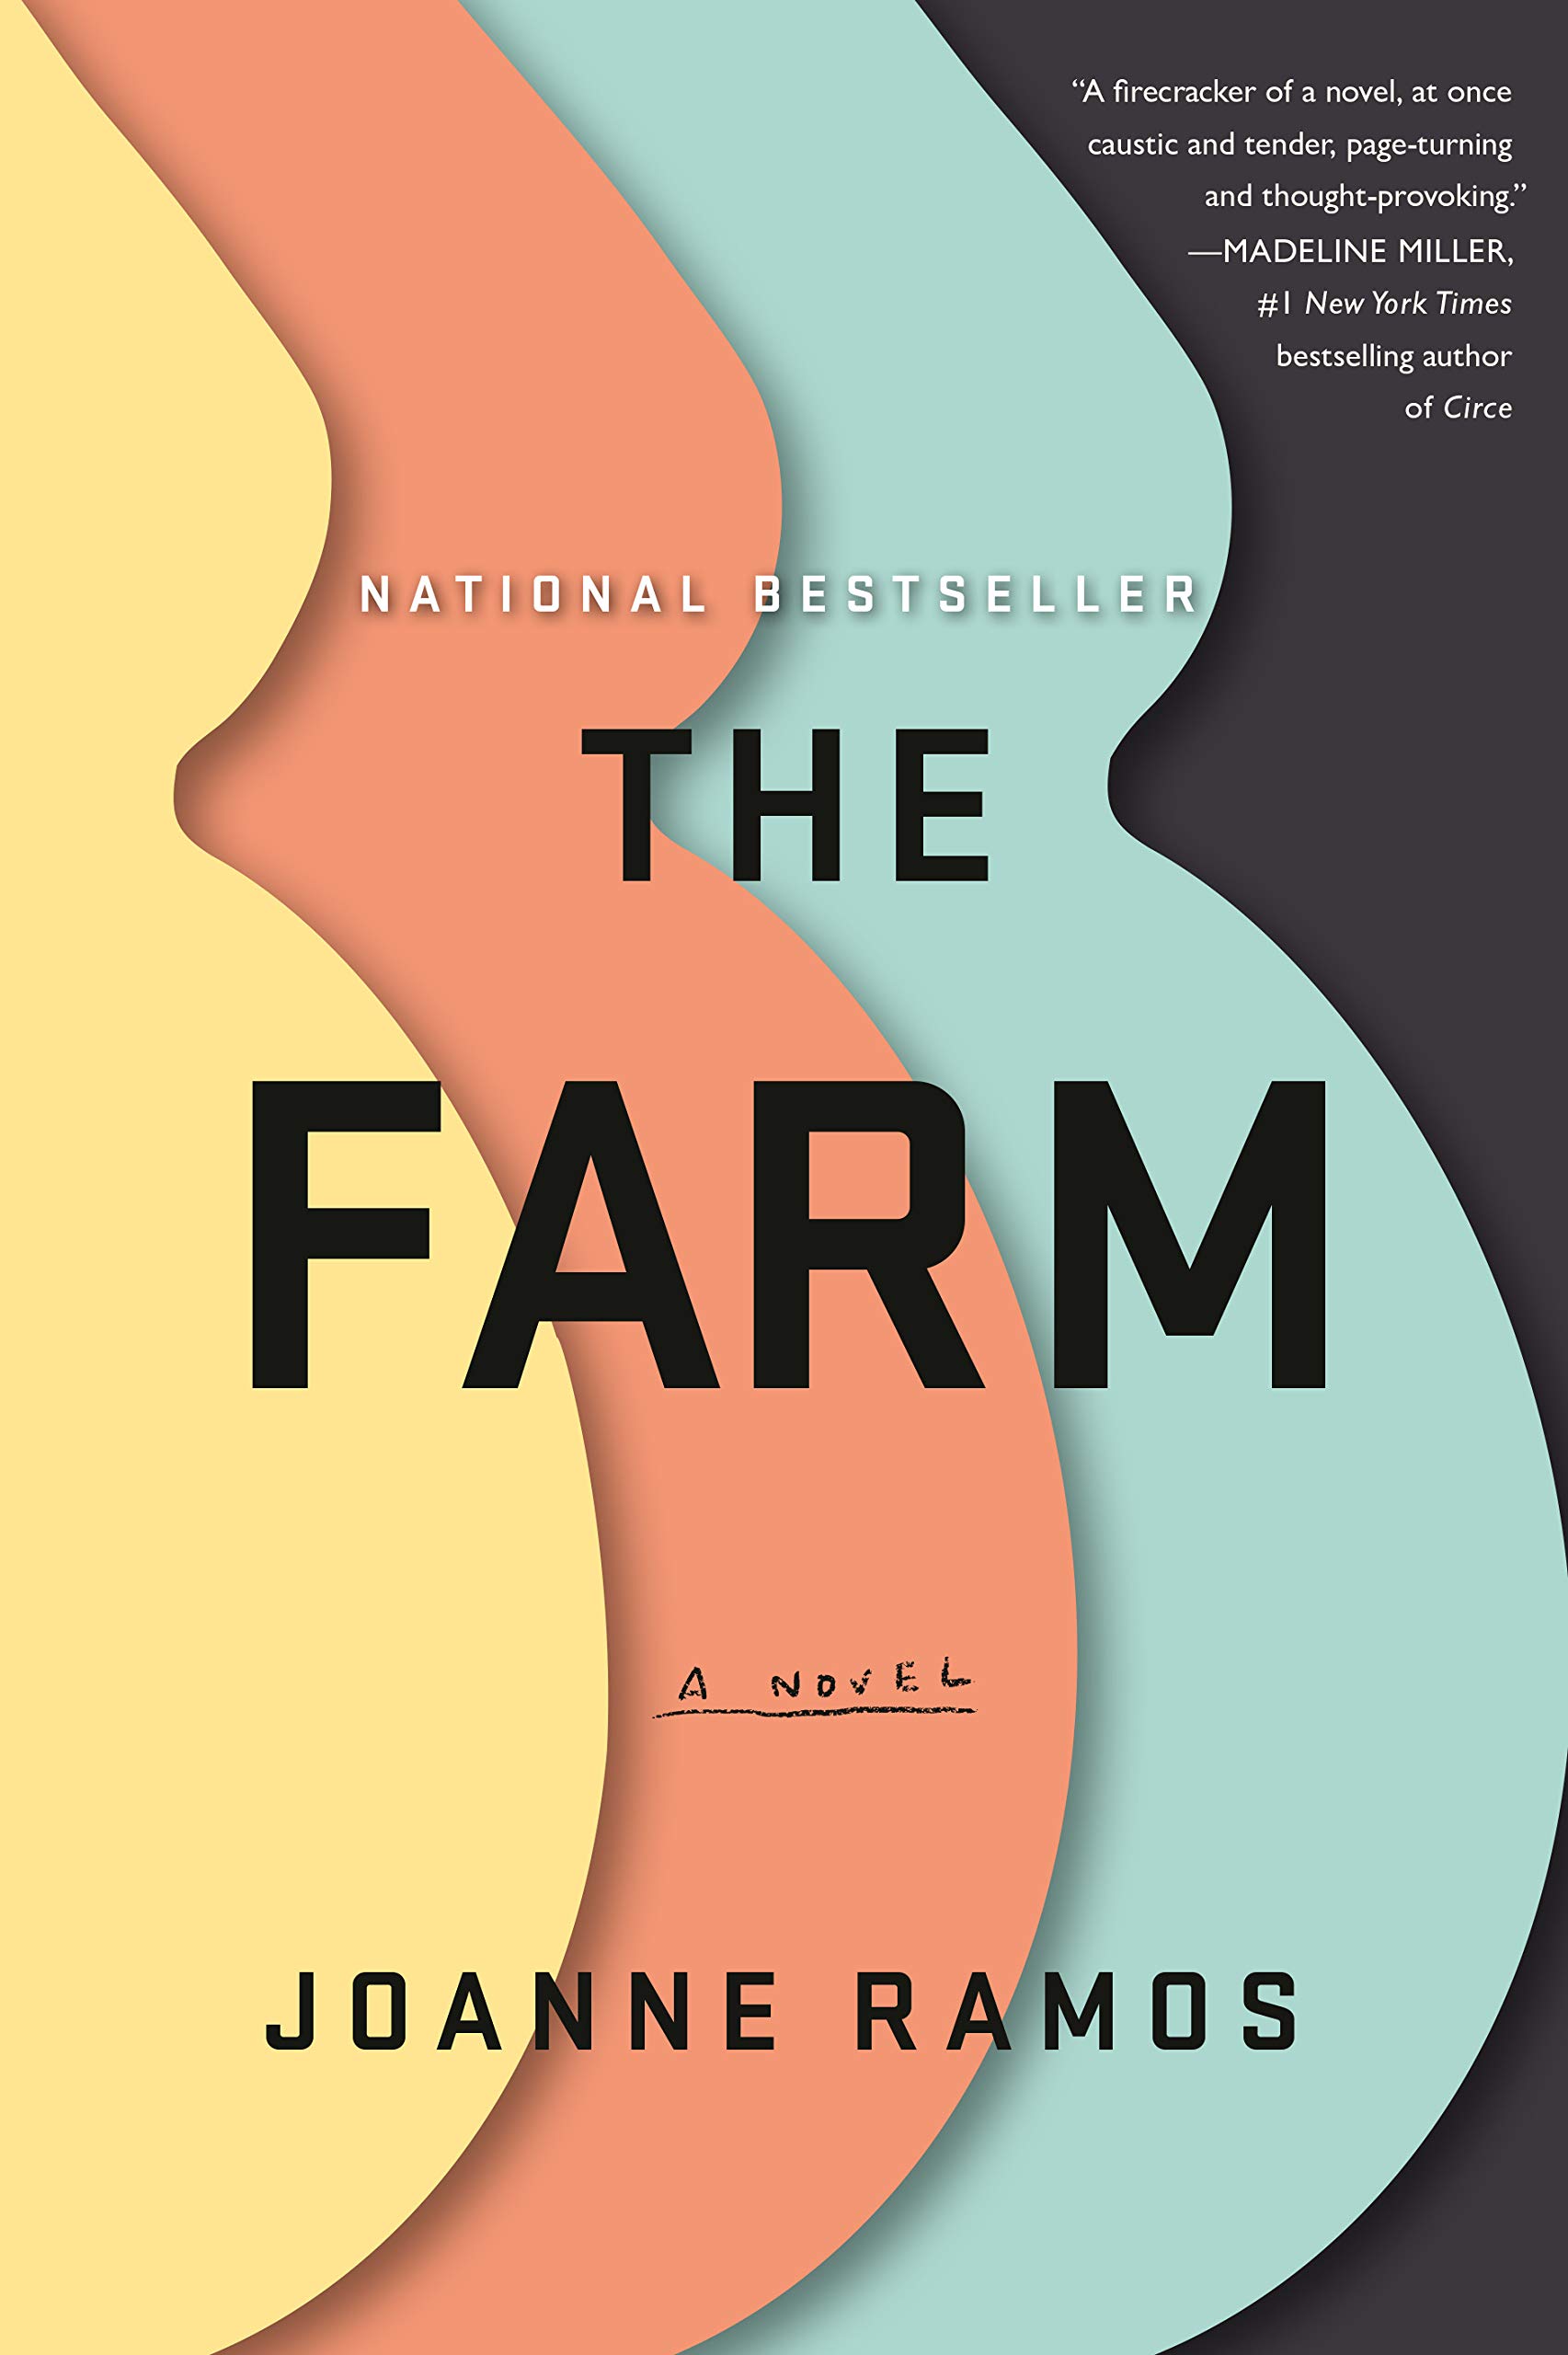 Image for "The Farm"